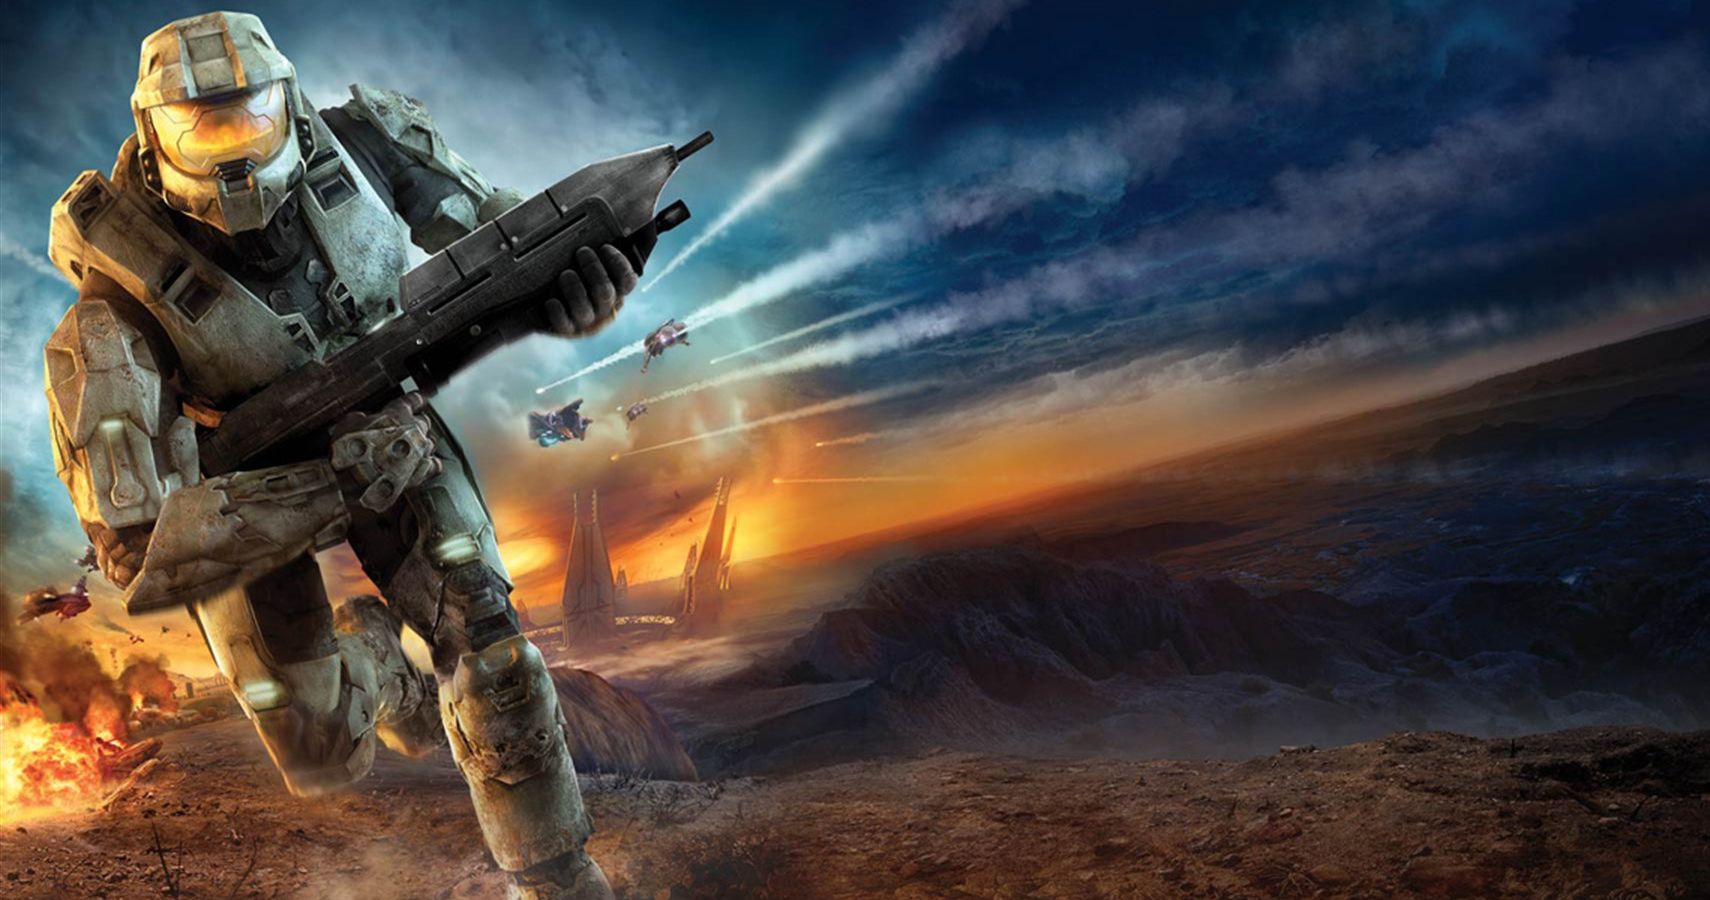 Halo 3s Public PC Beta Could Be Starting Soon